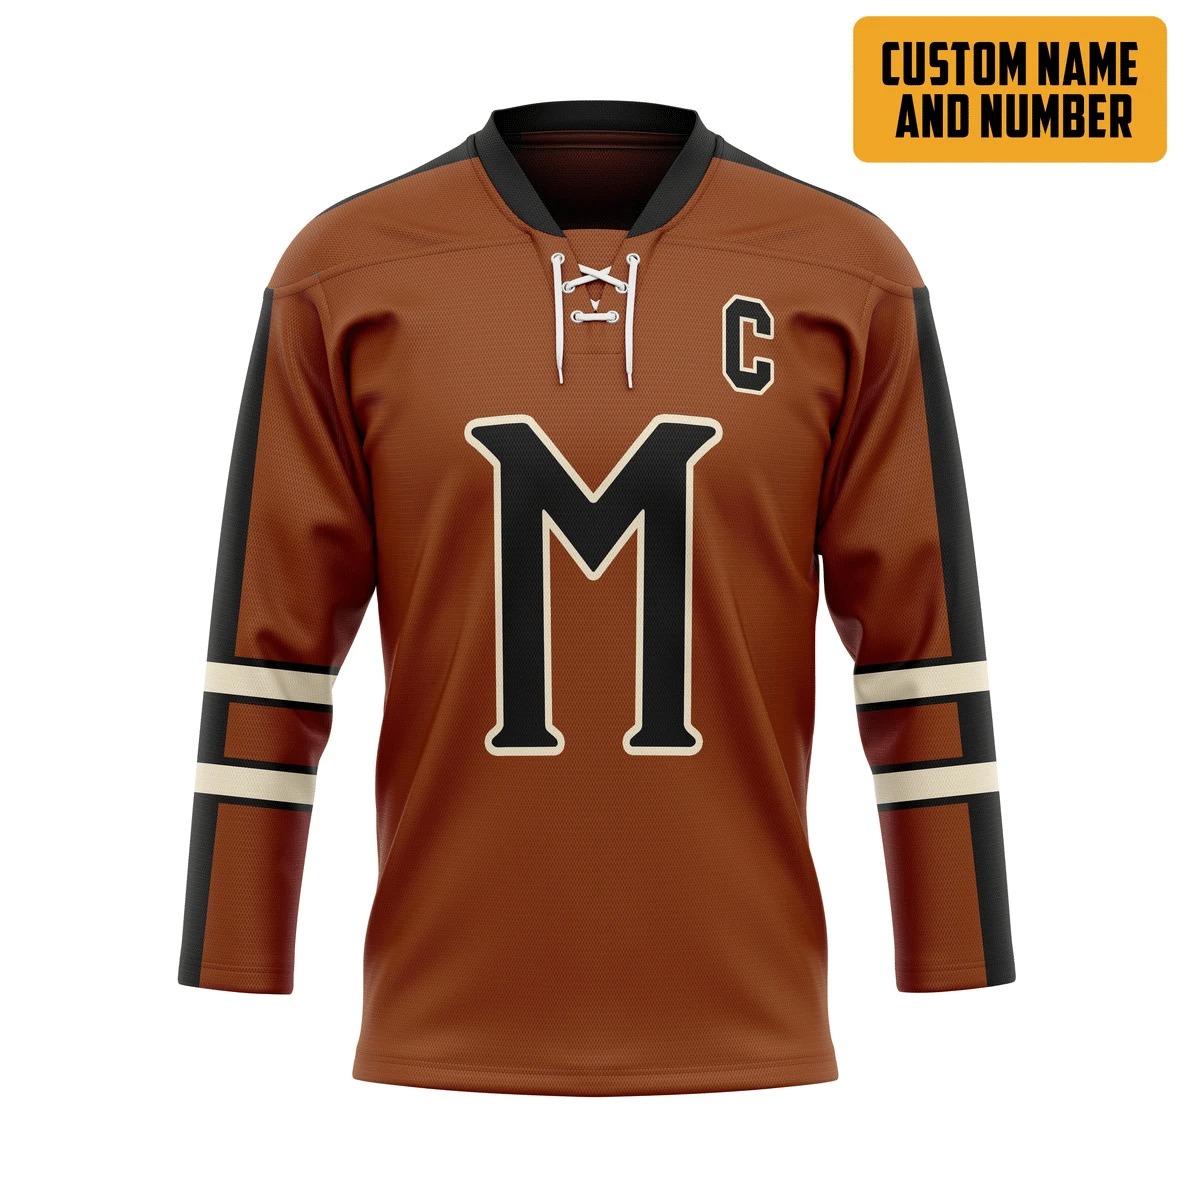 The style of a hockey jersey should match your personality. 56